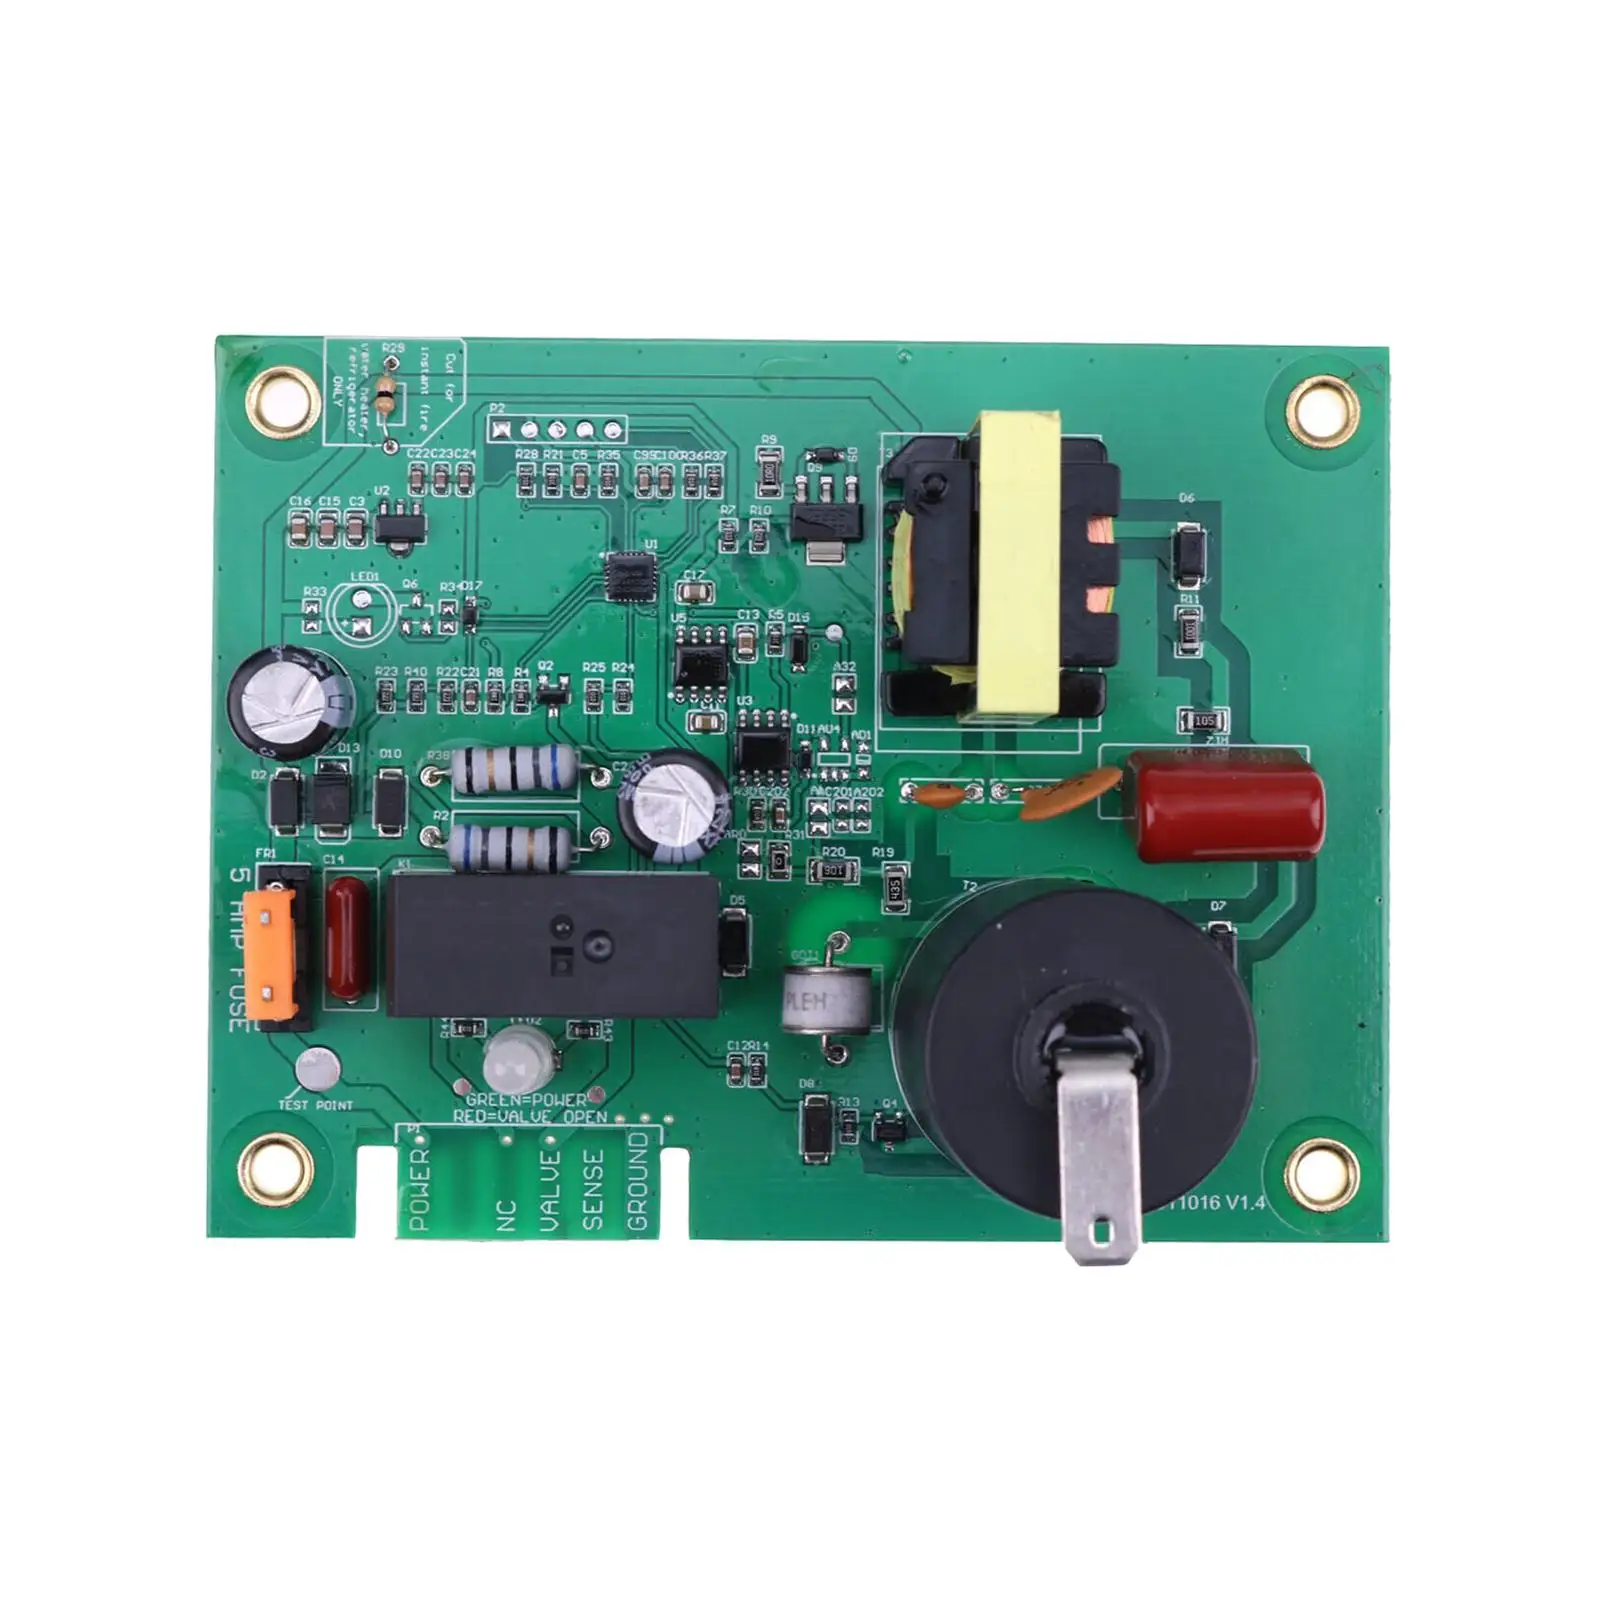 Ignitor Board Uib S Universal DC 12V External Sense Connector Water Heater Control Circuit Board Professional Easily to Install